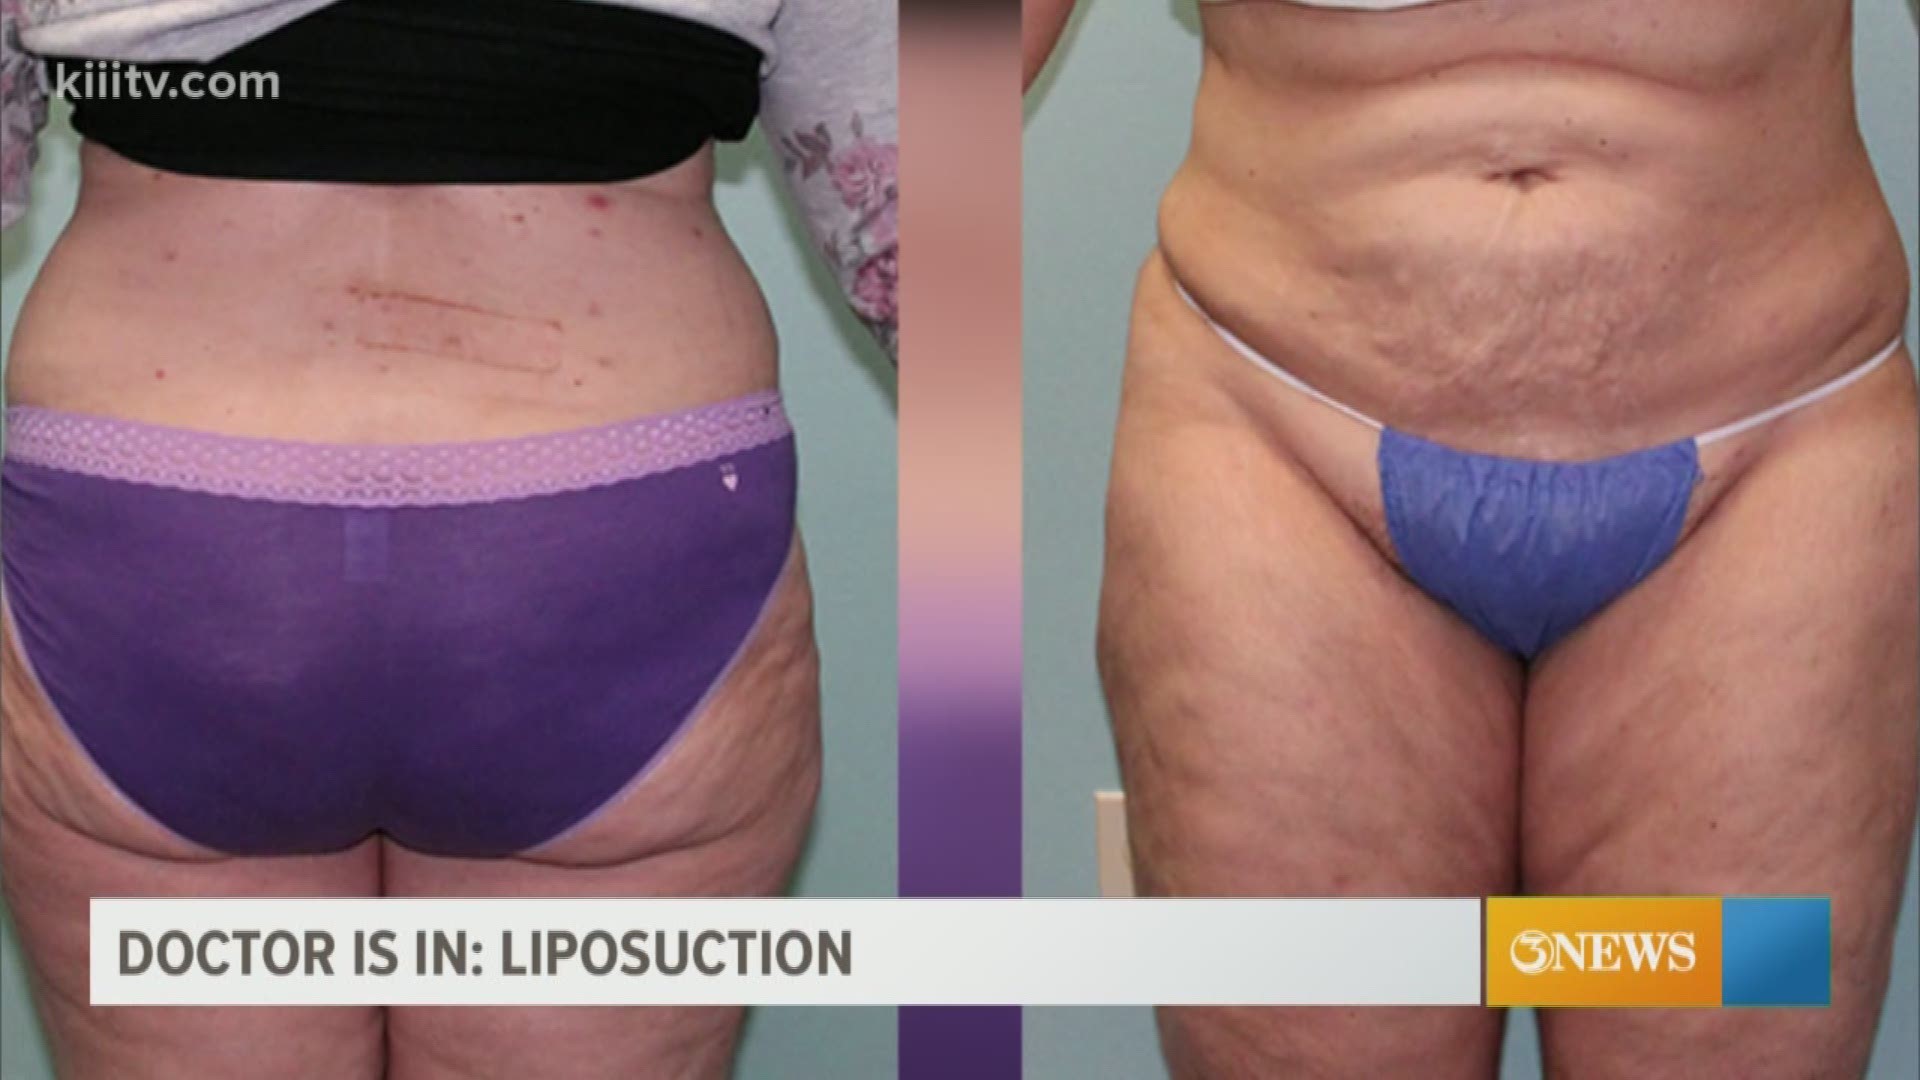 Liposuction produces impressive results but there are many factors to consider